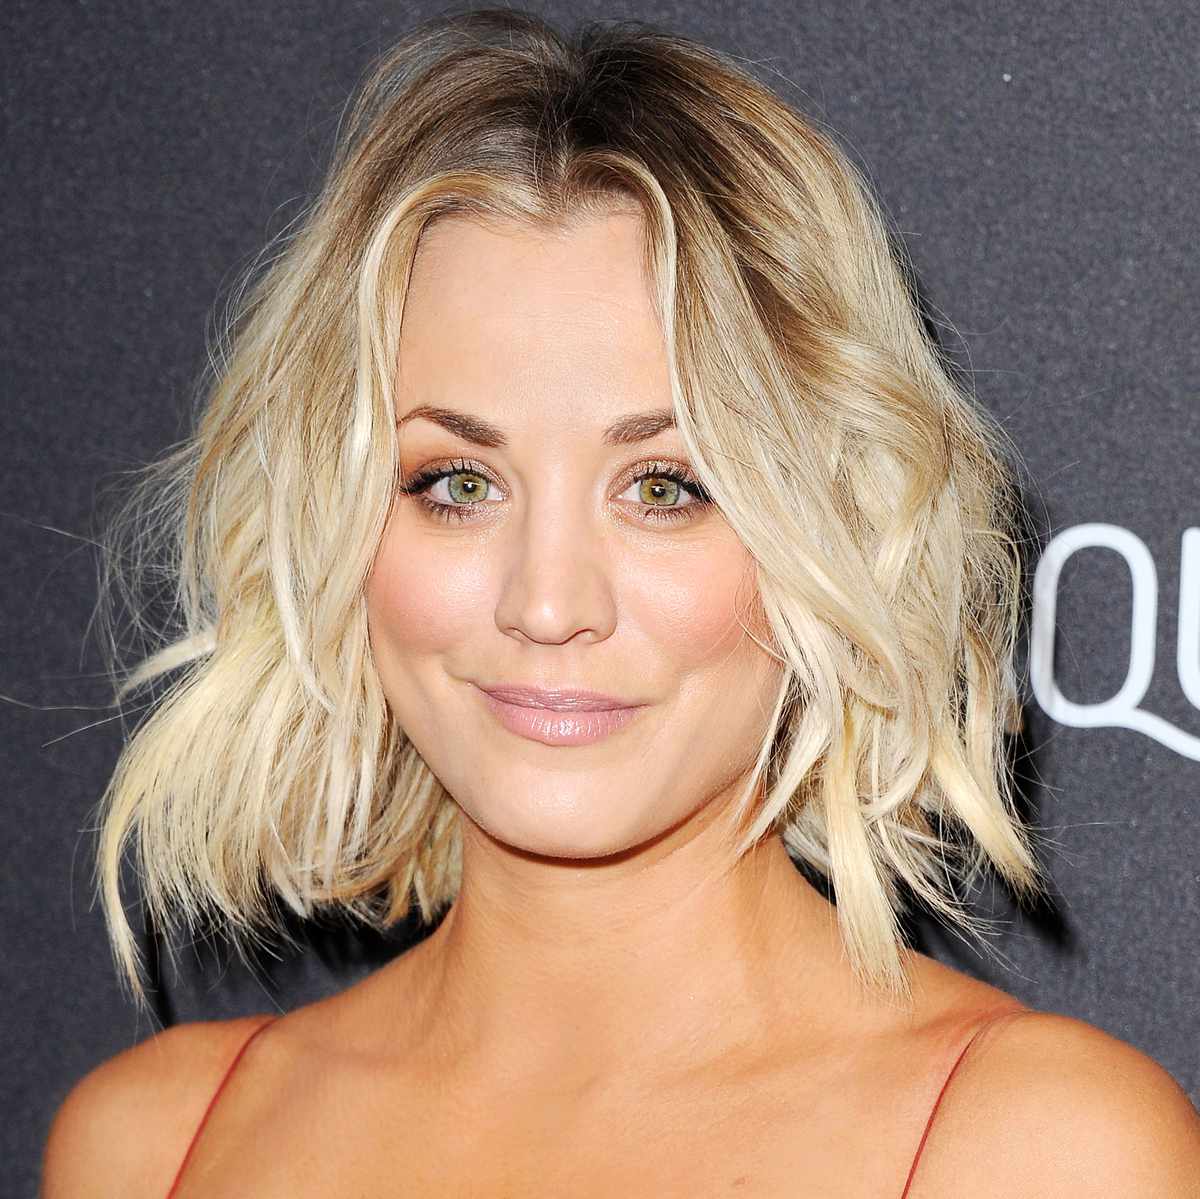 Kaley Cuoco S Beauty Transformation Instyle Kaley cuoco seen sporting pink hair as she walks to ride her horse at a ranch in moorpark, california on april 29, 2015. kaley cuoco s beauty transformation instyle